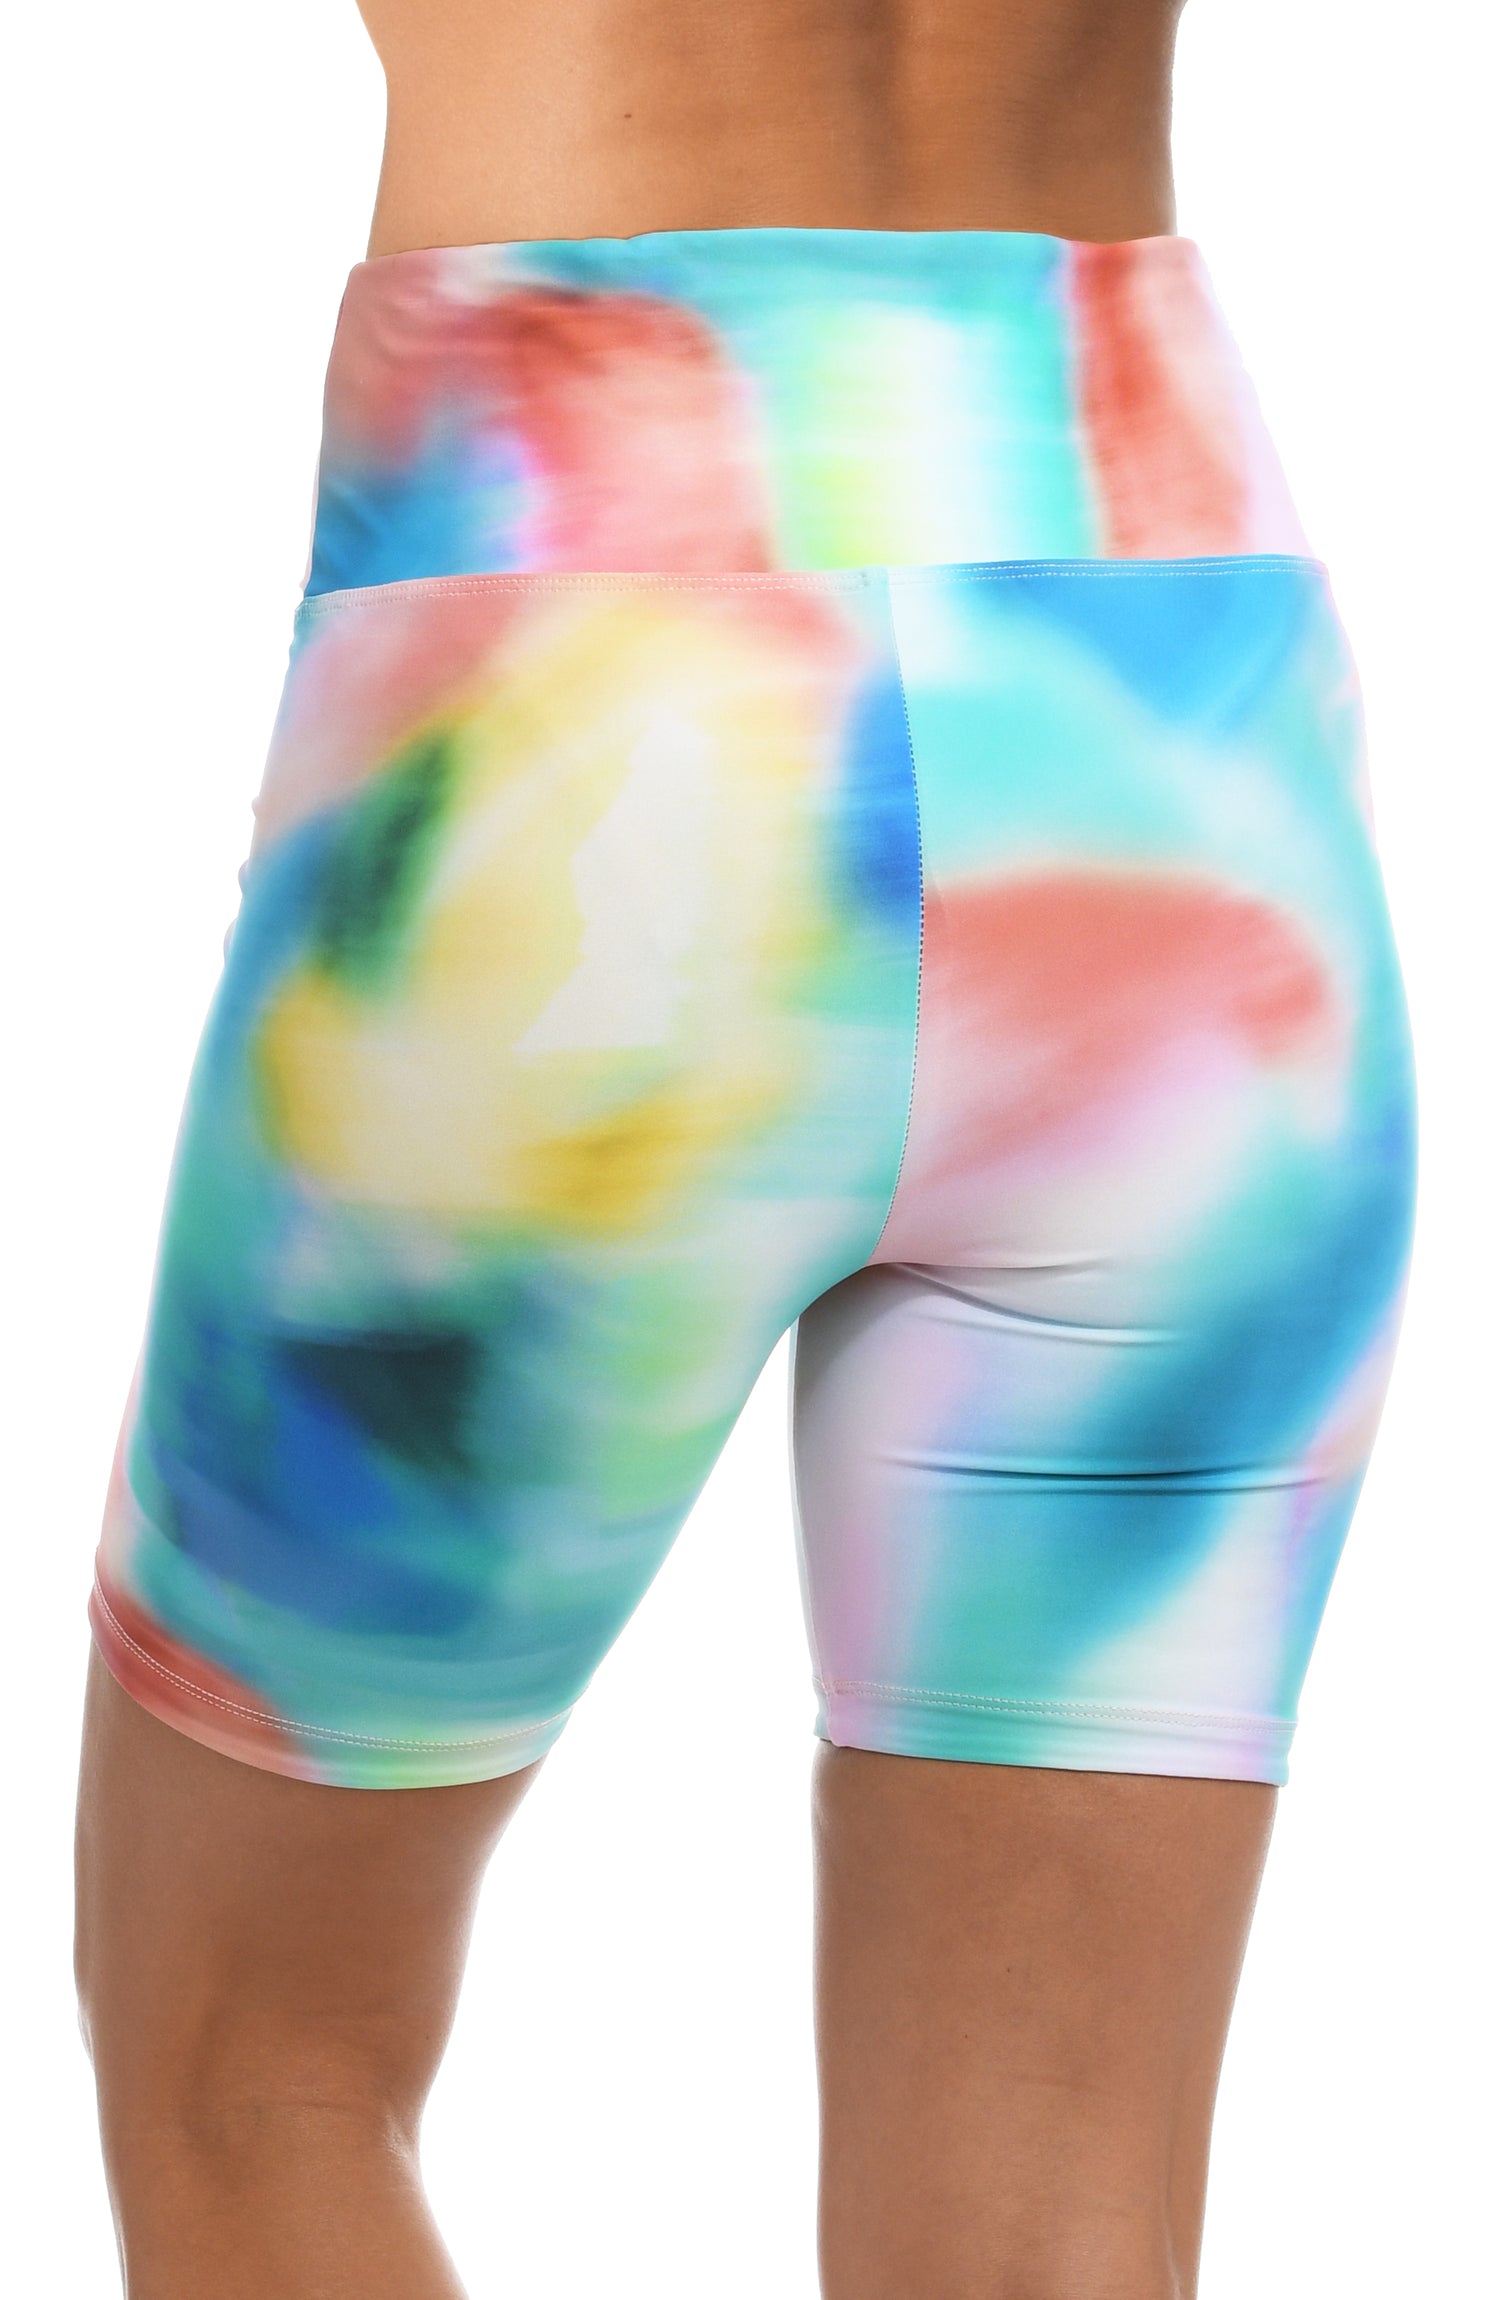 Model is wearing a multi-colored tie-dye inspired high waist bike short from our Sunset Tide collection!